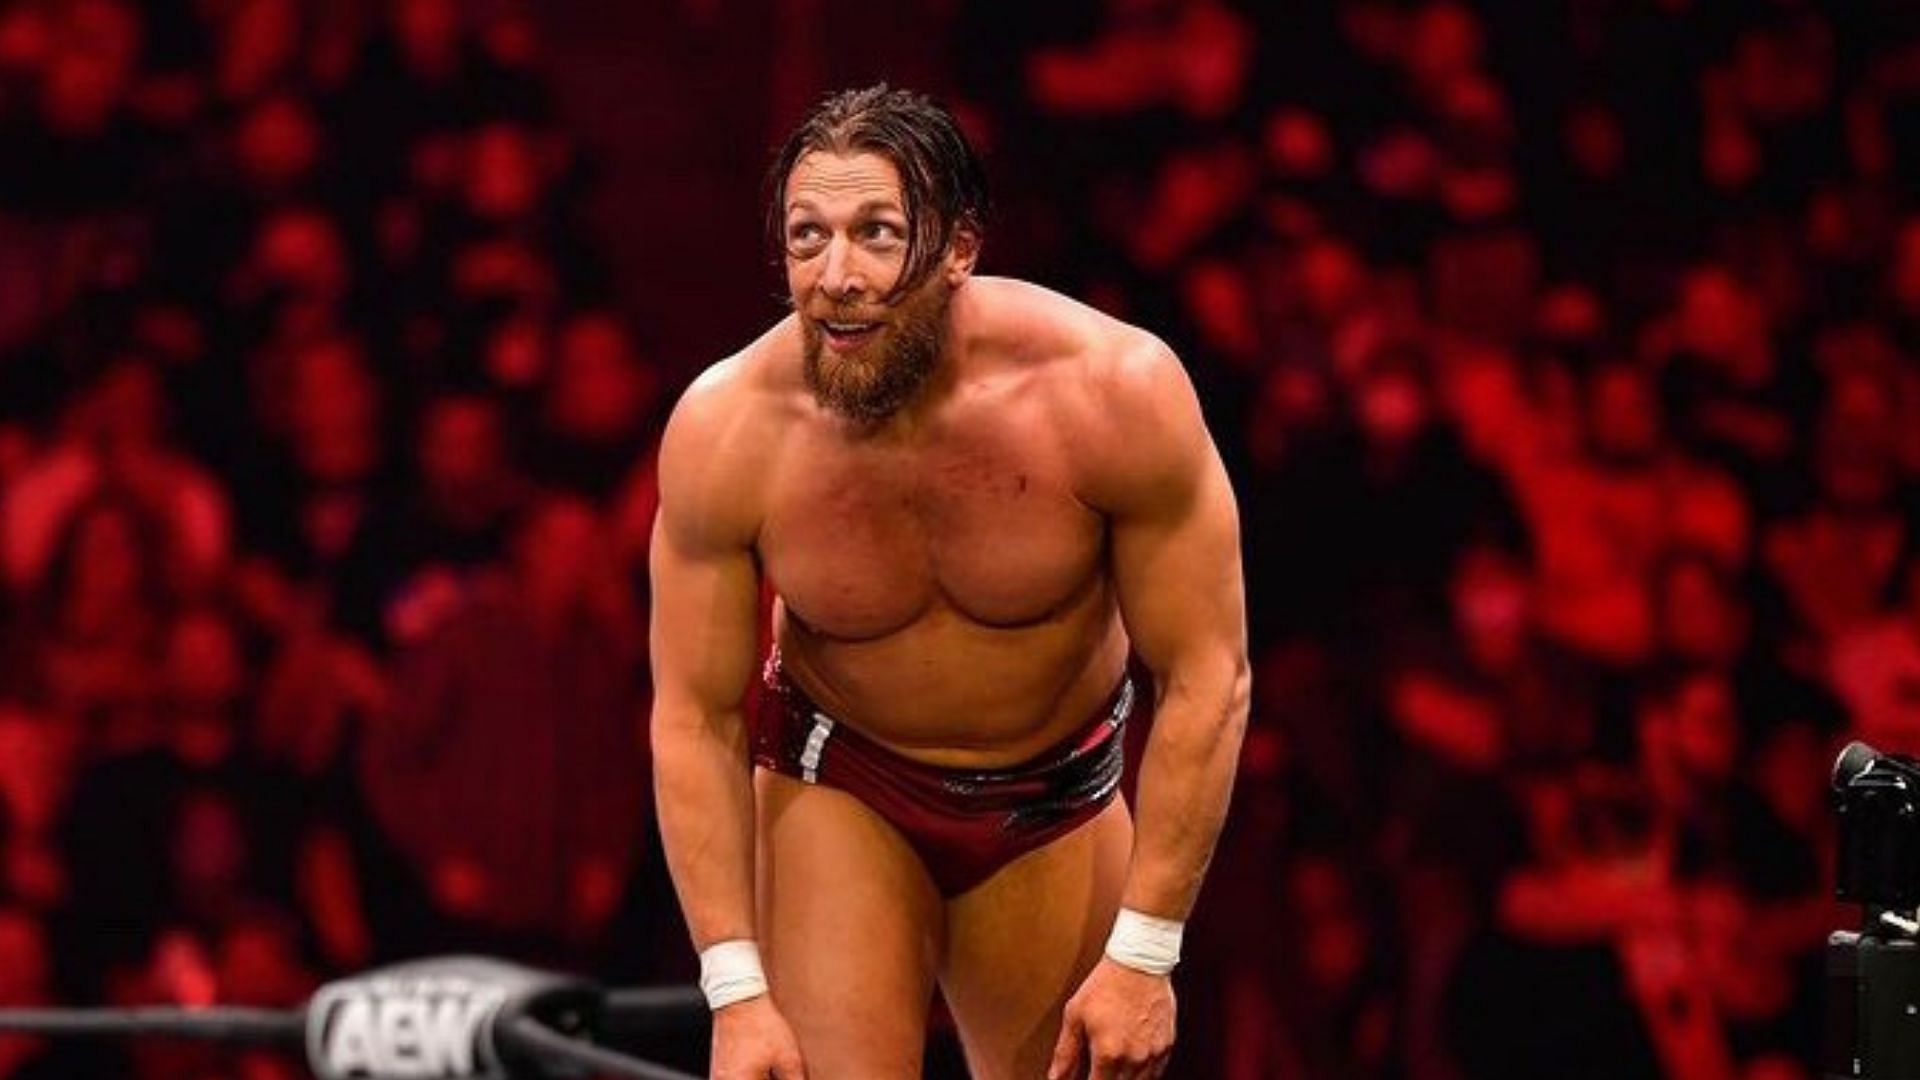 Bryan Danielson at an AEW event in 2021